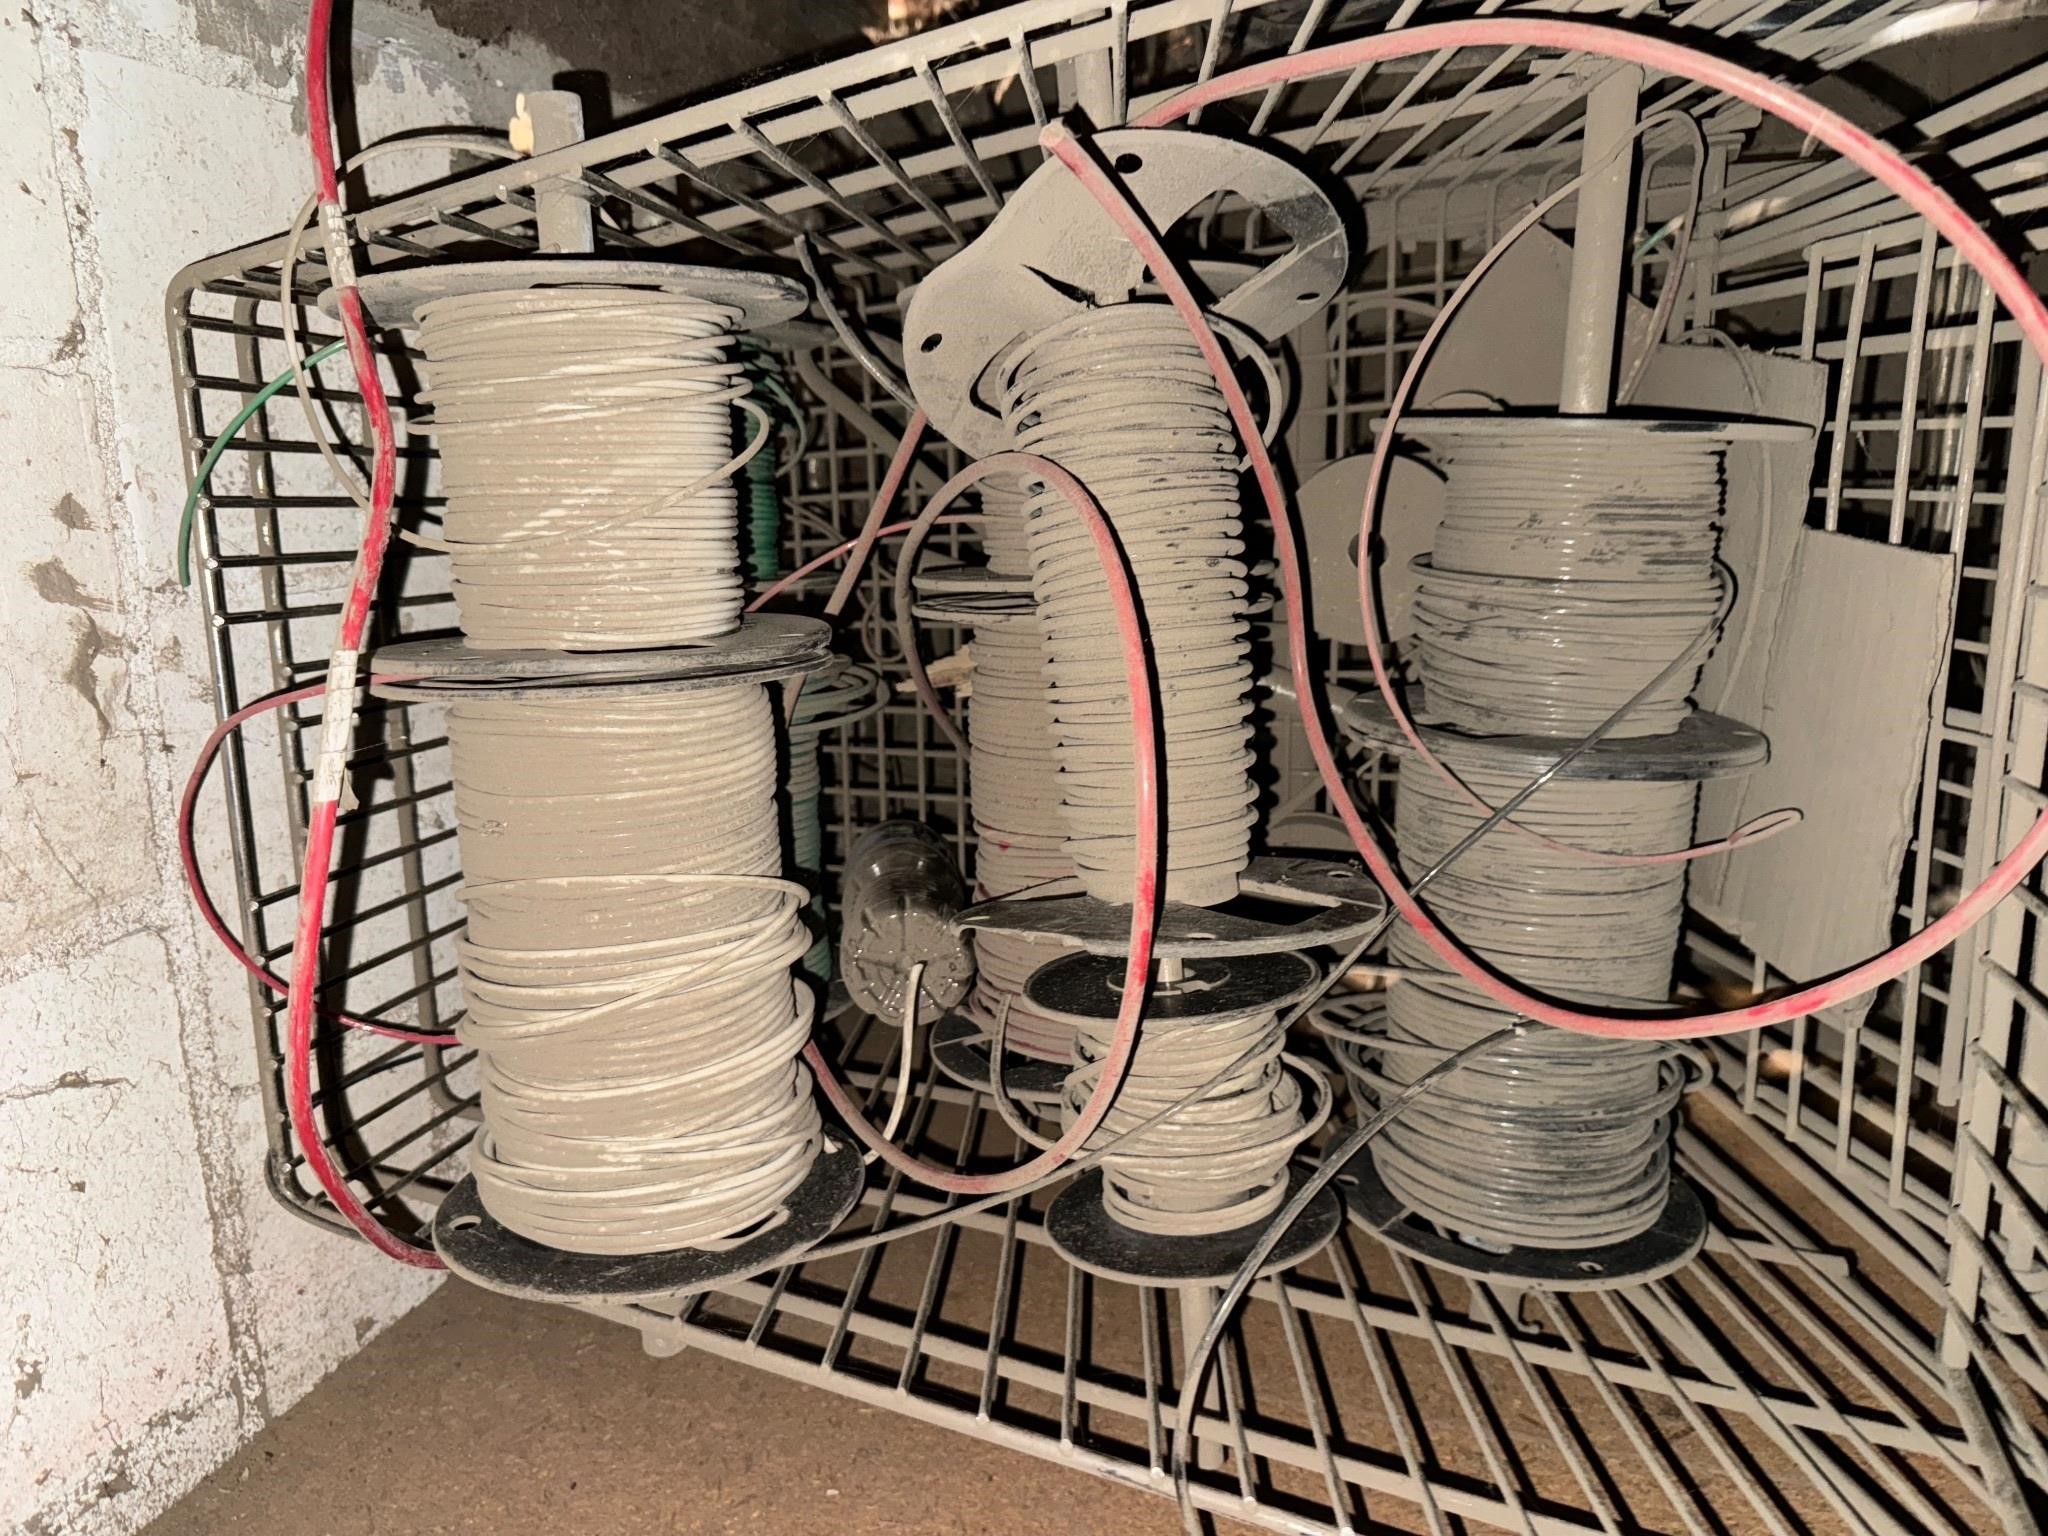 Shopping cart with rolls of wire